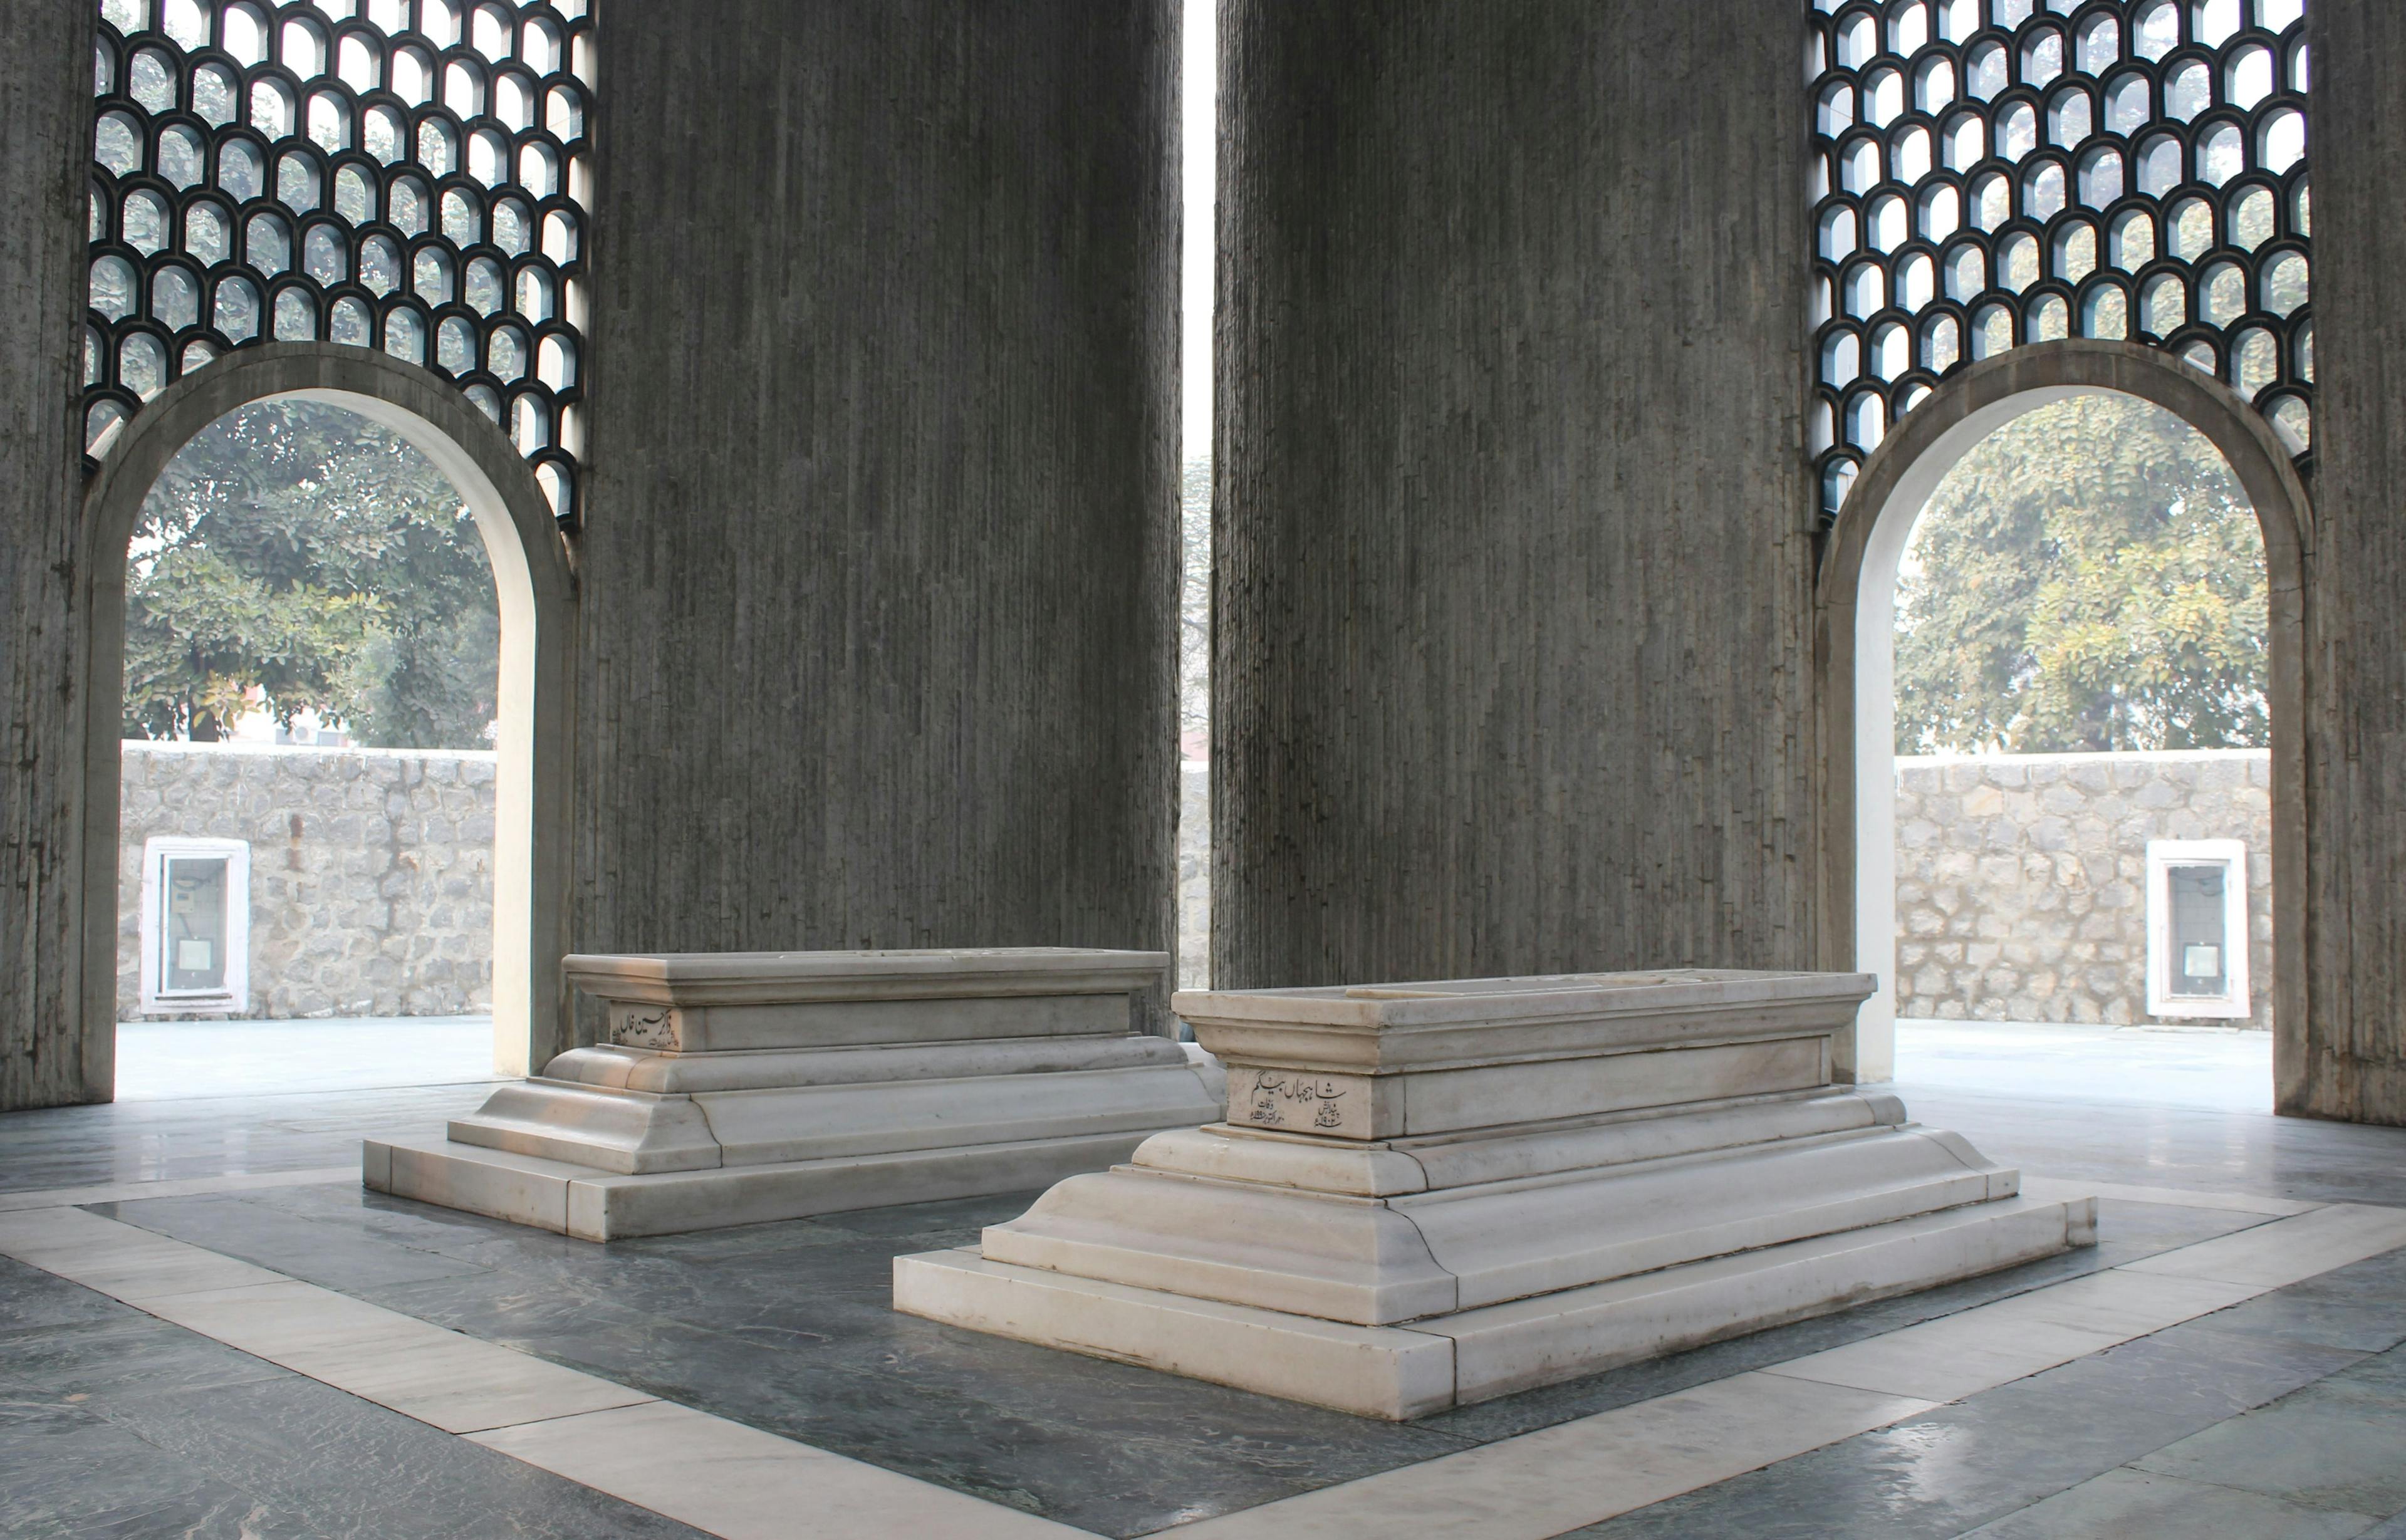 Dr Zakir Husain and his wife’s mausoleum in the university